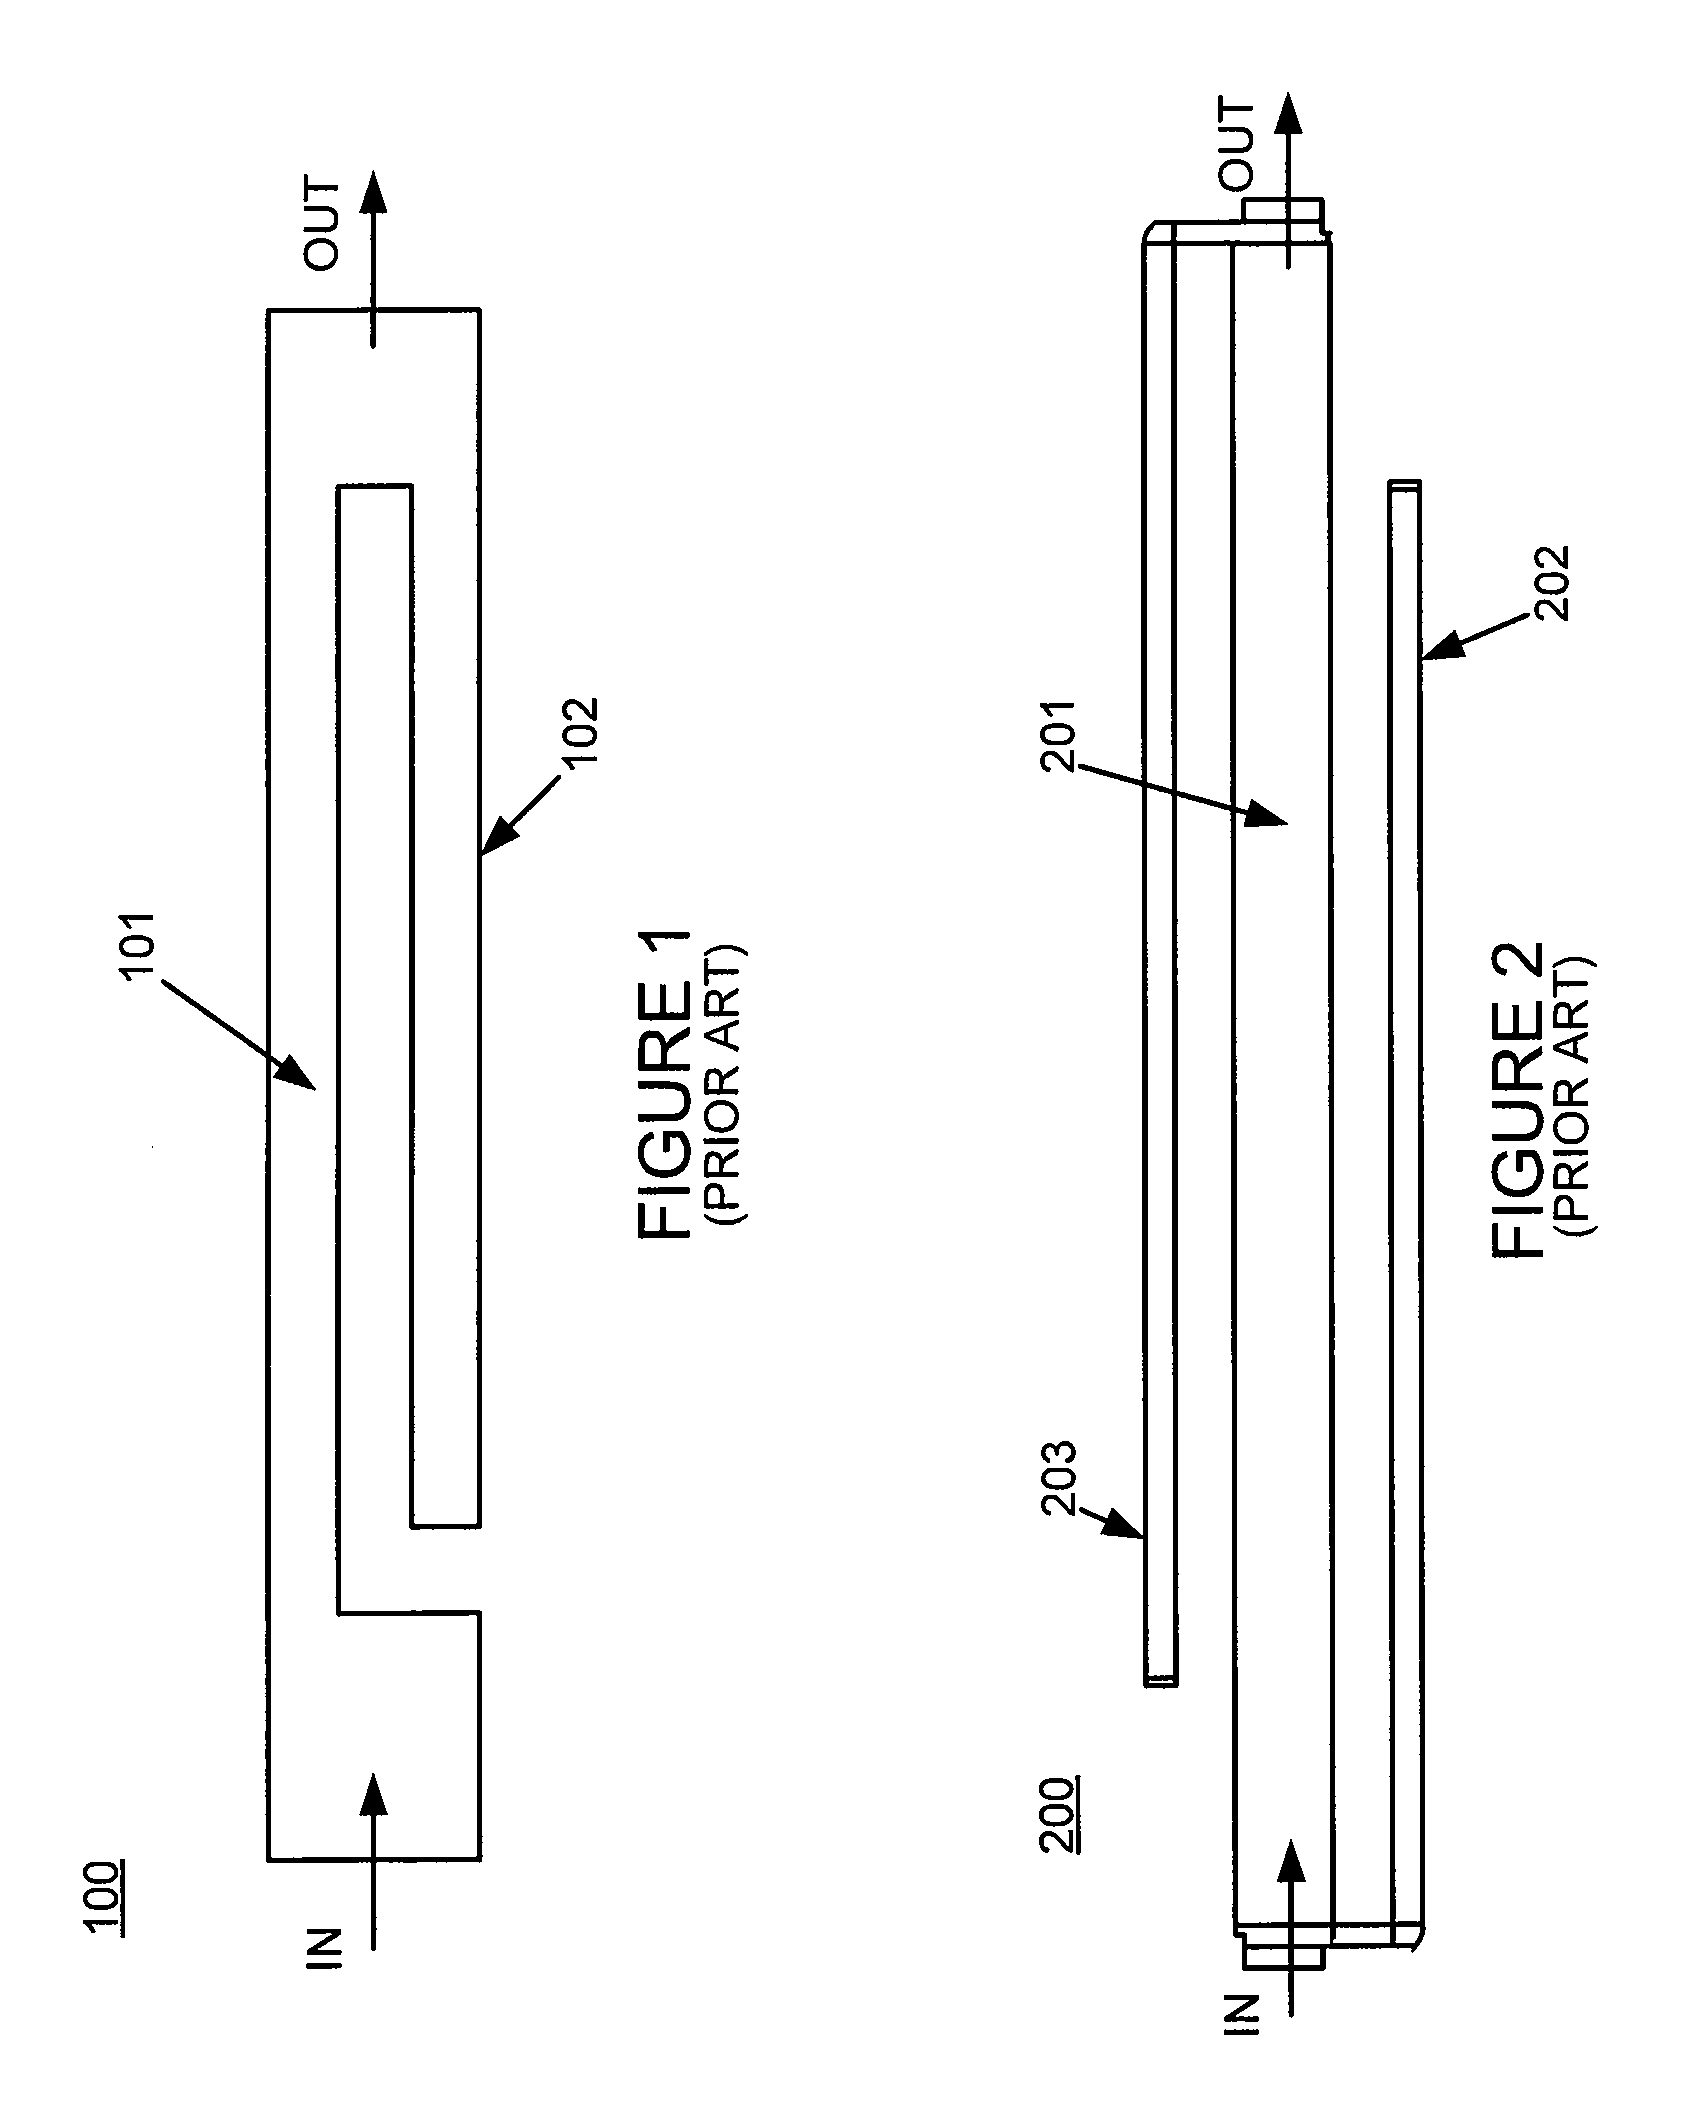 Capacitively loaded spurline filter